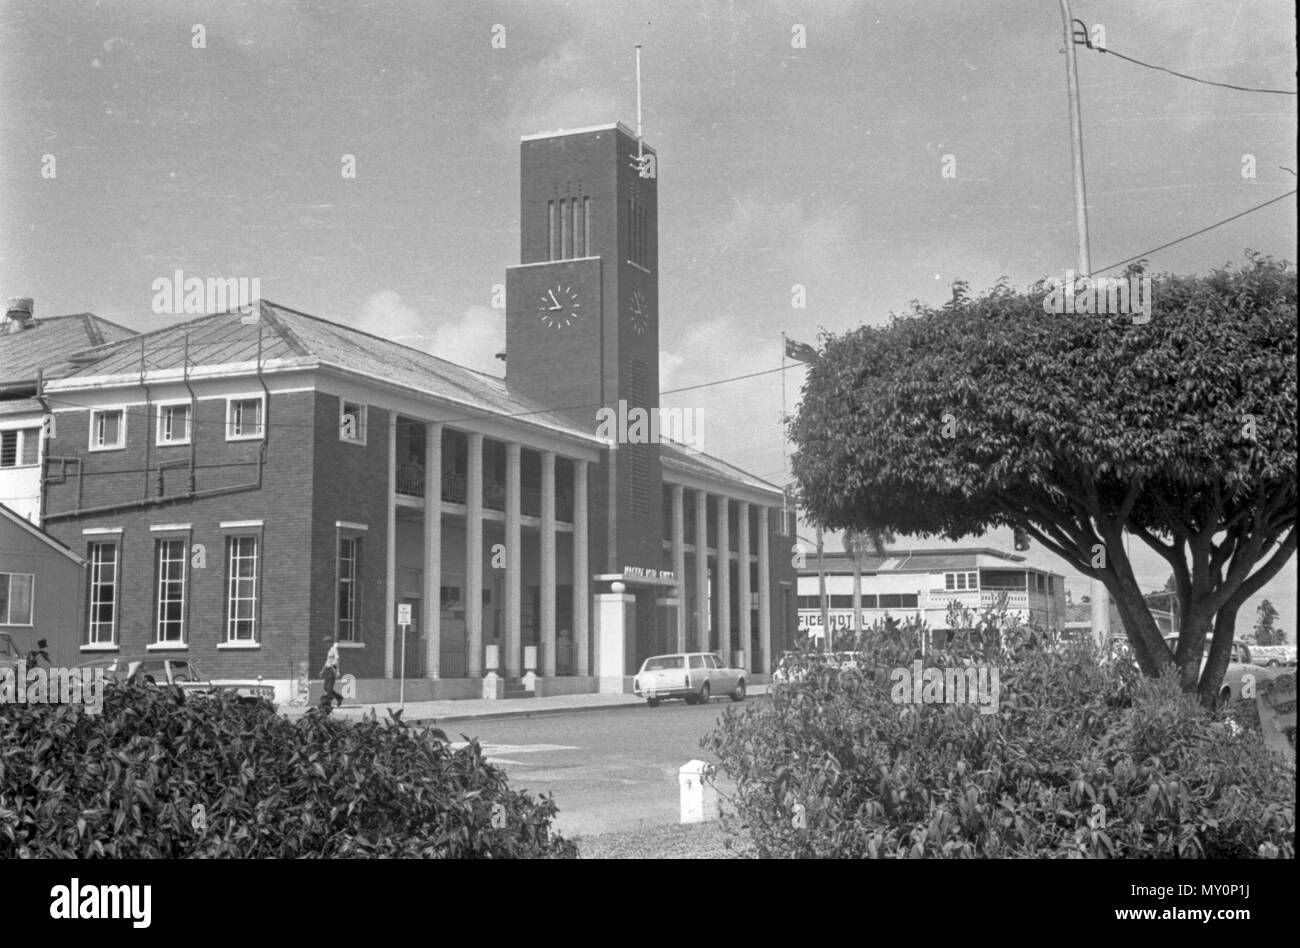 Post Office, Mackay, c 1971. The Mackay Post Office was designed by the Colonial Architect, Francis Stanley, and built in 1883. It was extensively remodelled in 1938 to an understated art deco style. Stock Photo